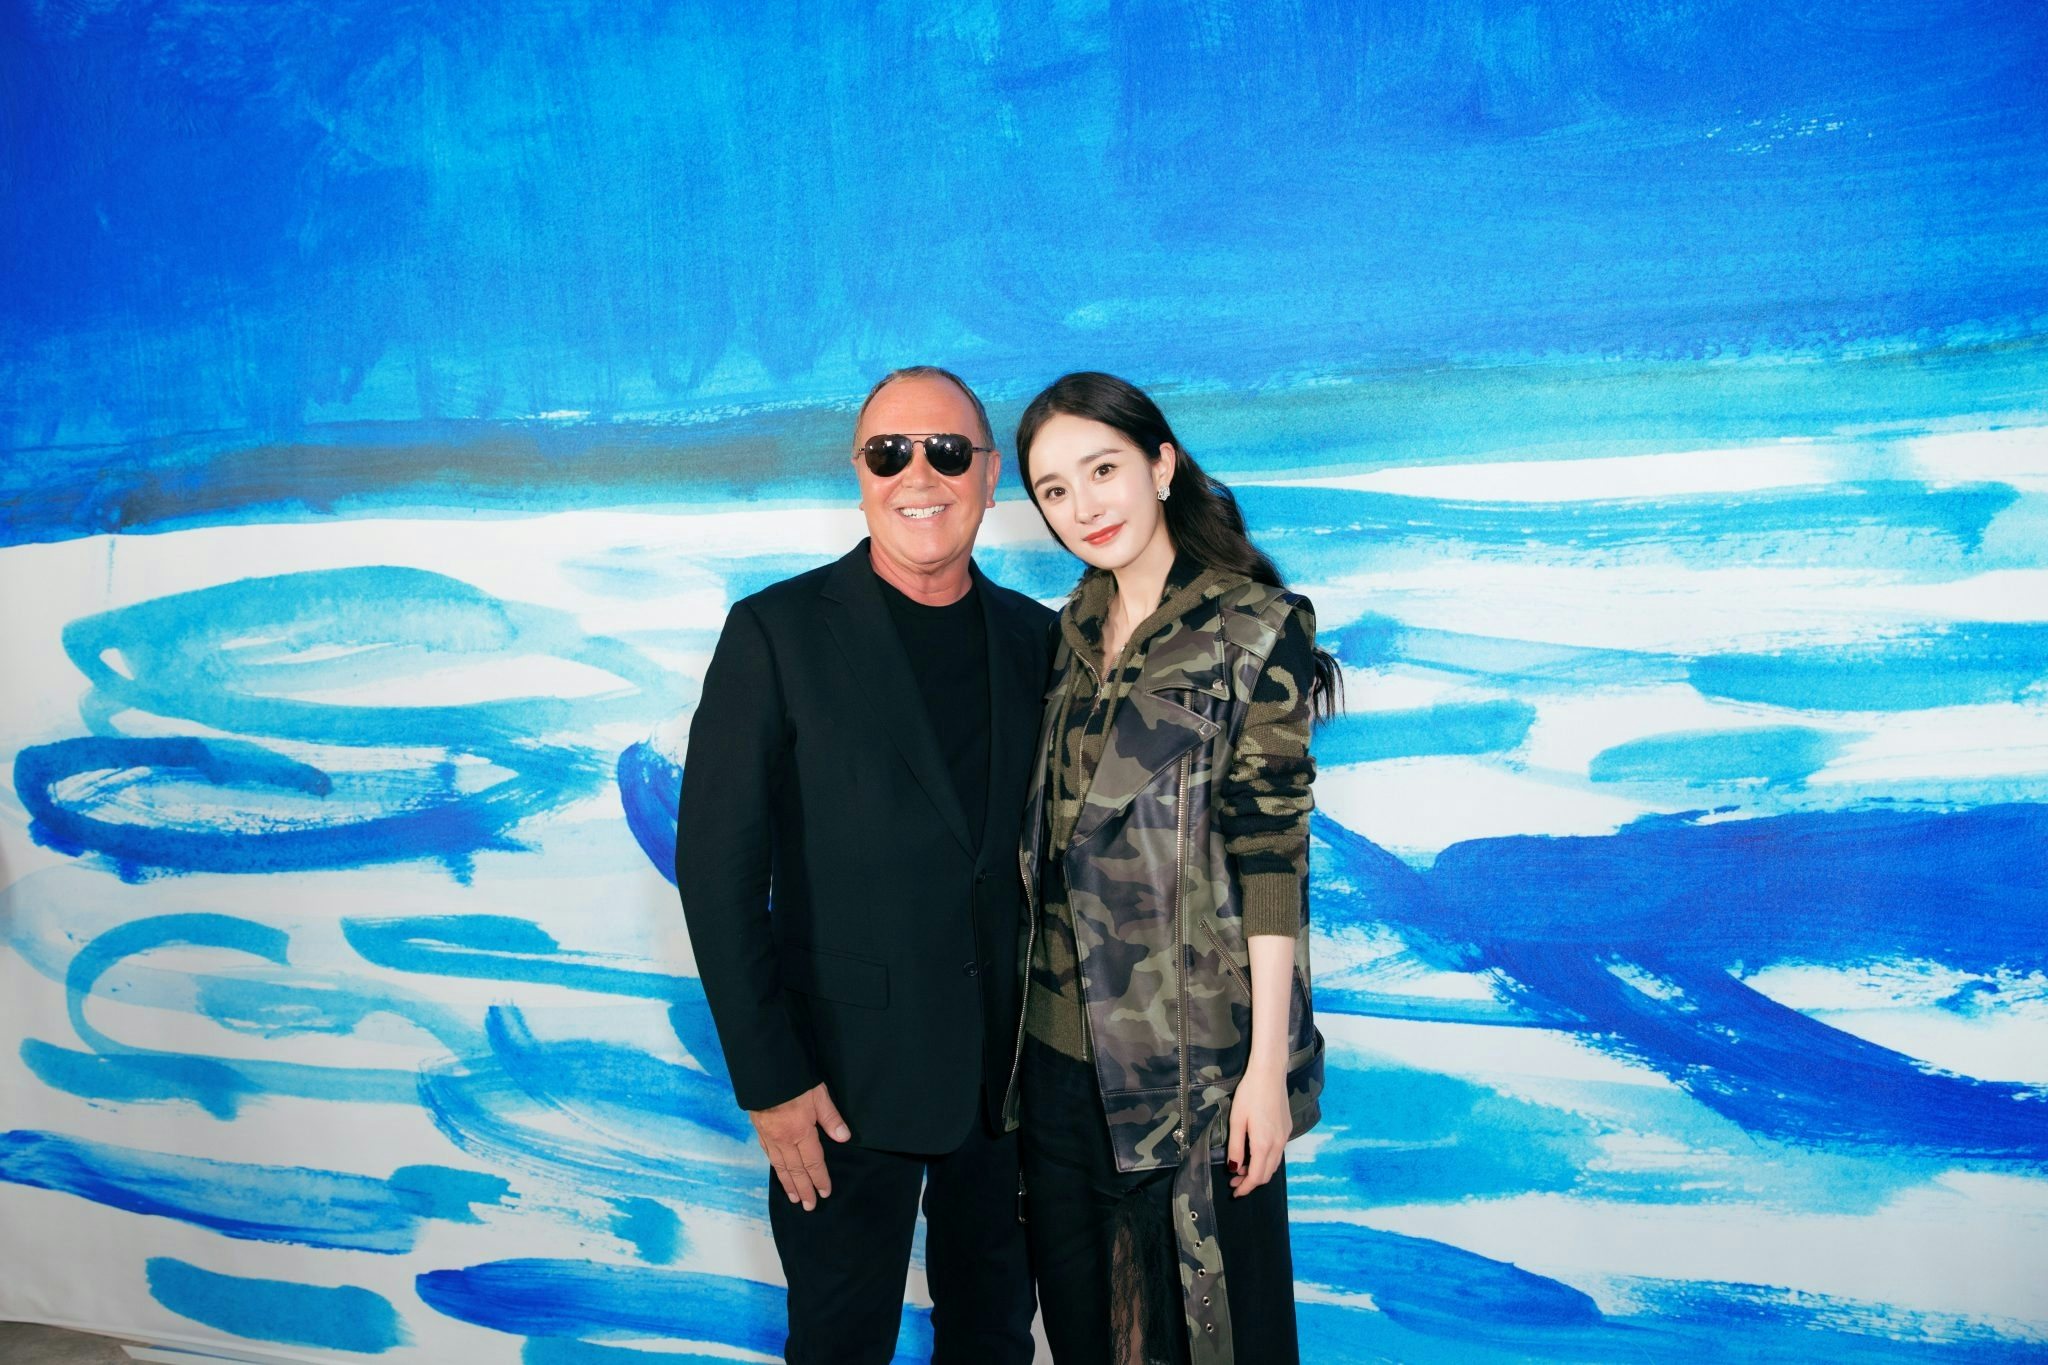 Michaels Kors (Left), and Yang Mi (Right) at the brand's New York Fashion Week Spring/Summer 2019 Runway Show. Courtesy photo 